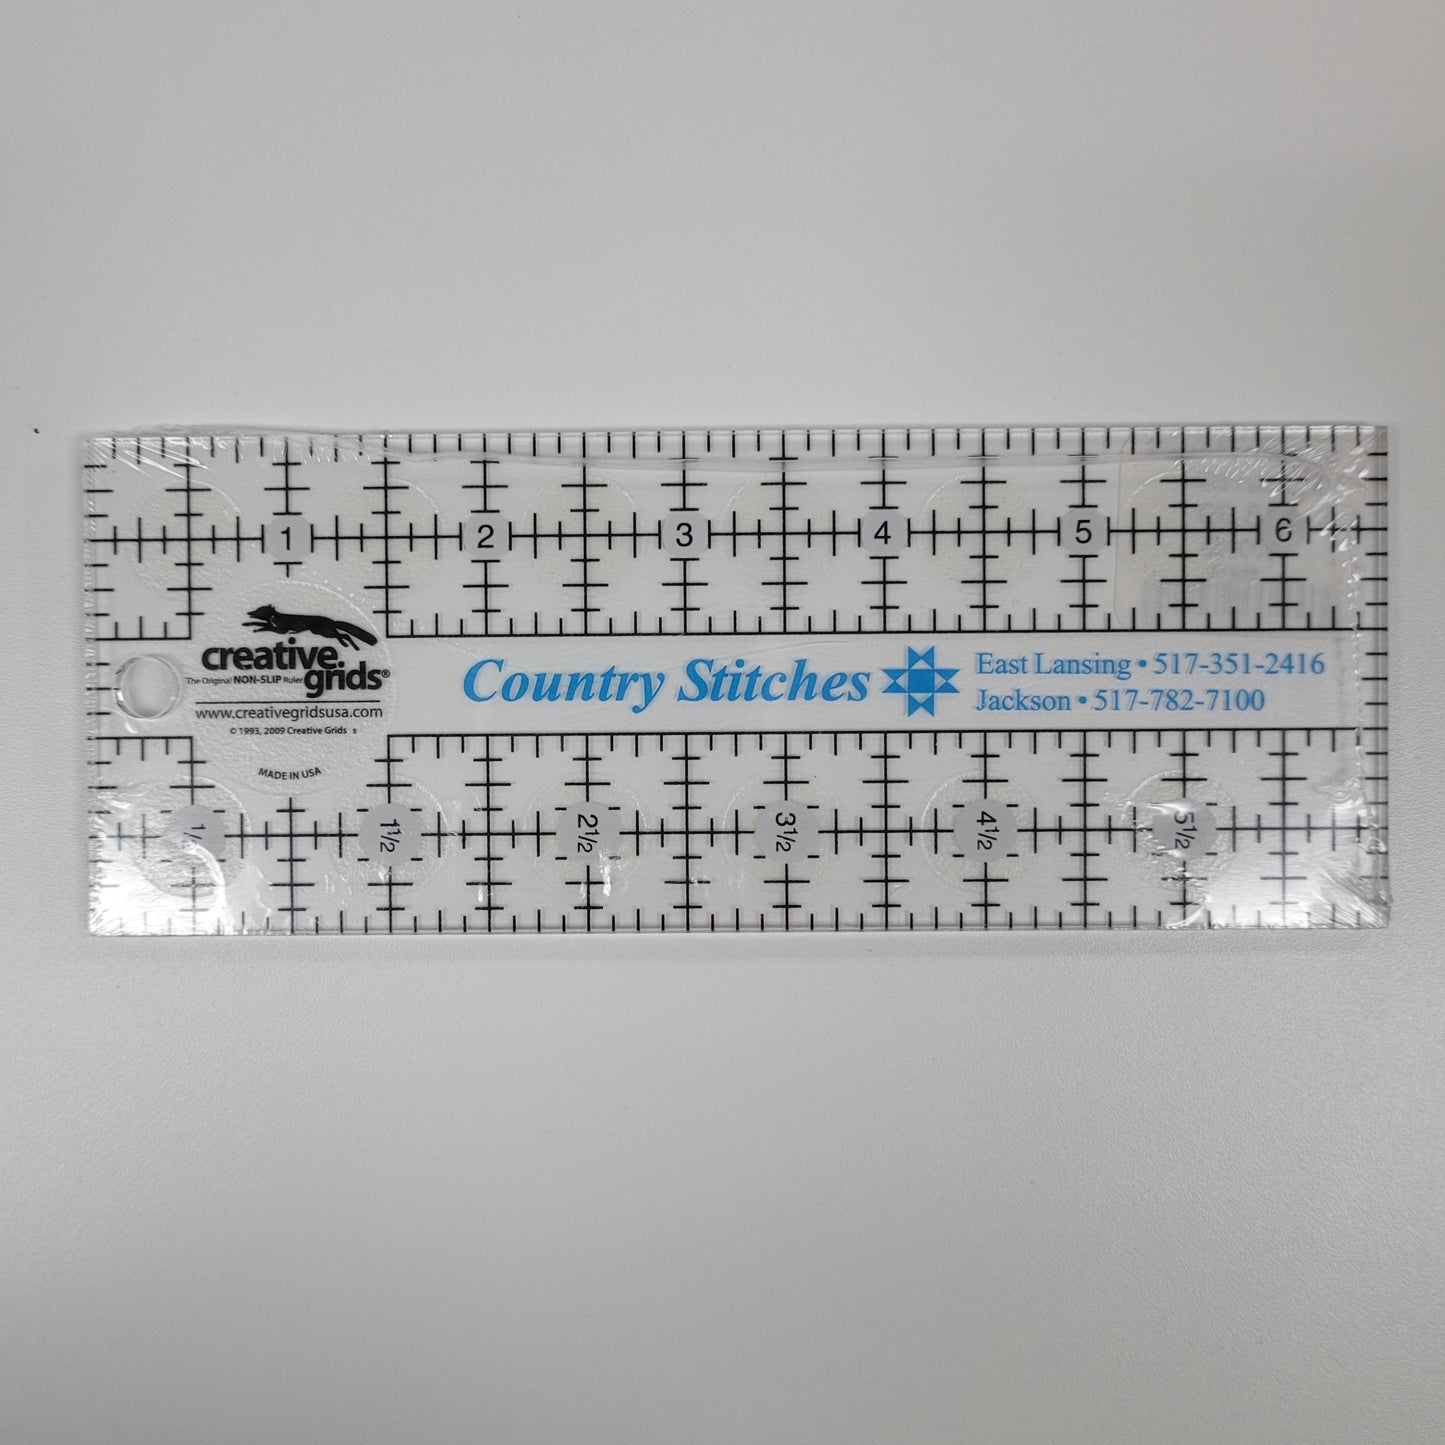 Creative Grids Ruler 6.5" x 2.5" - Country Stitches Keepsake